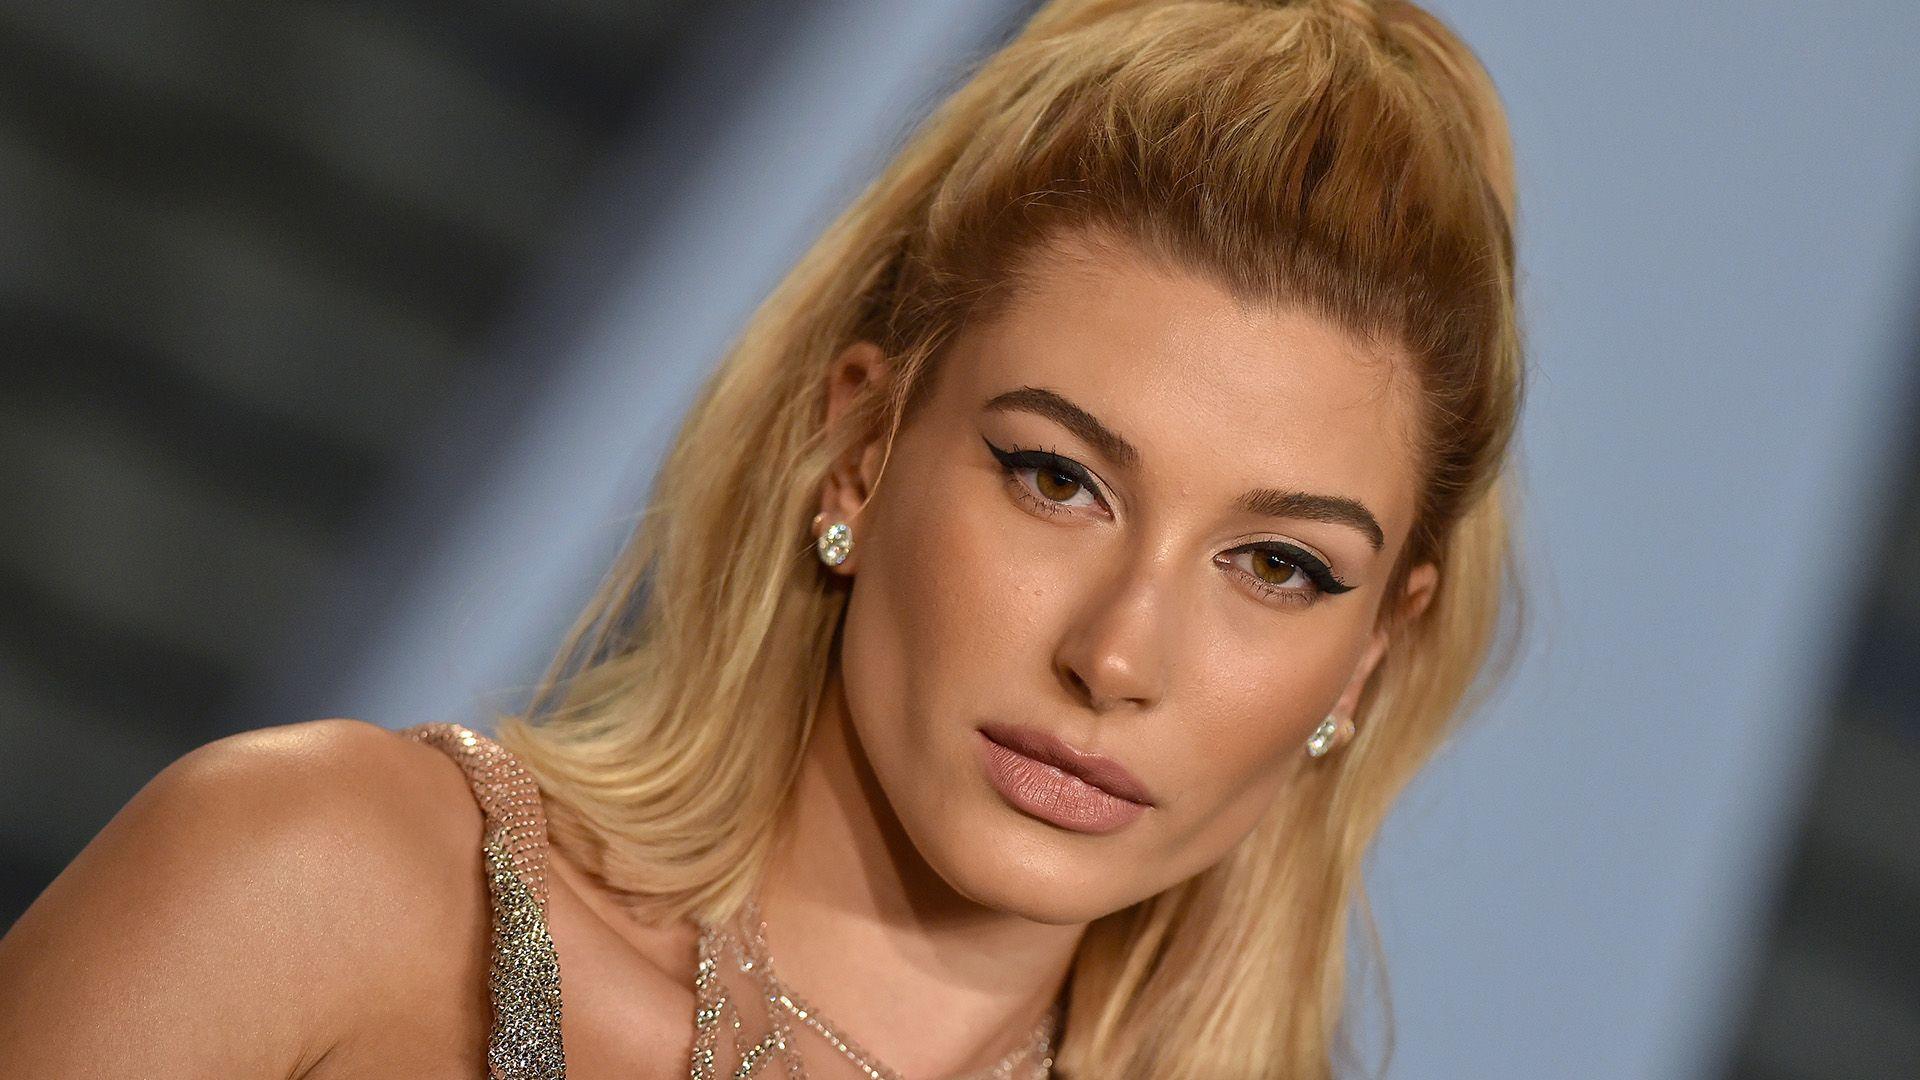 All you need to know about model Hailey Baldwin